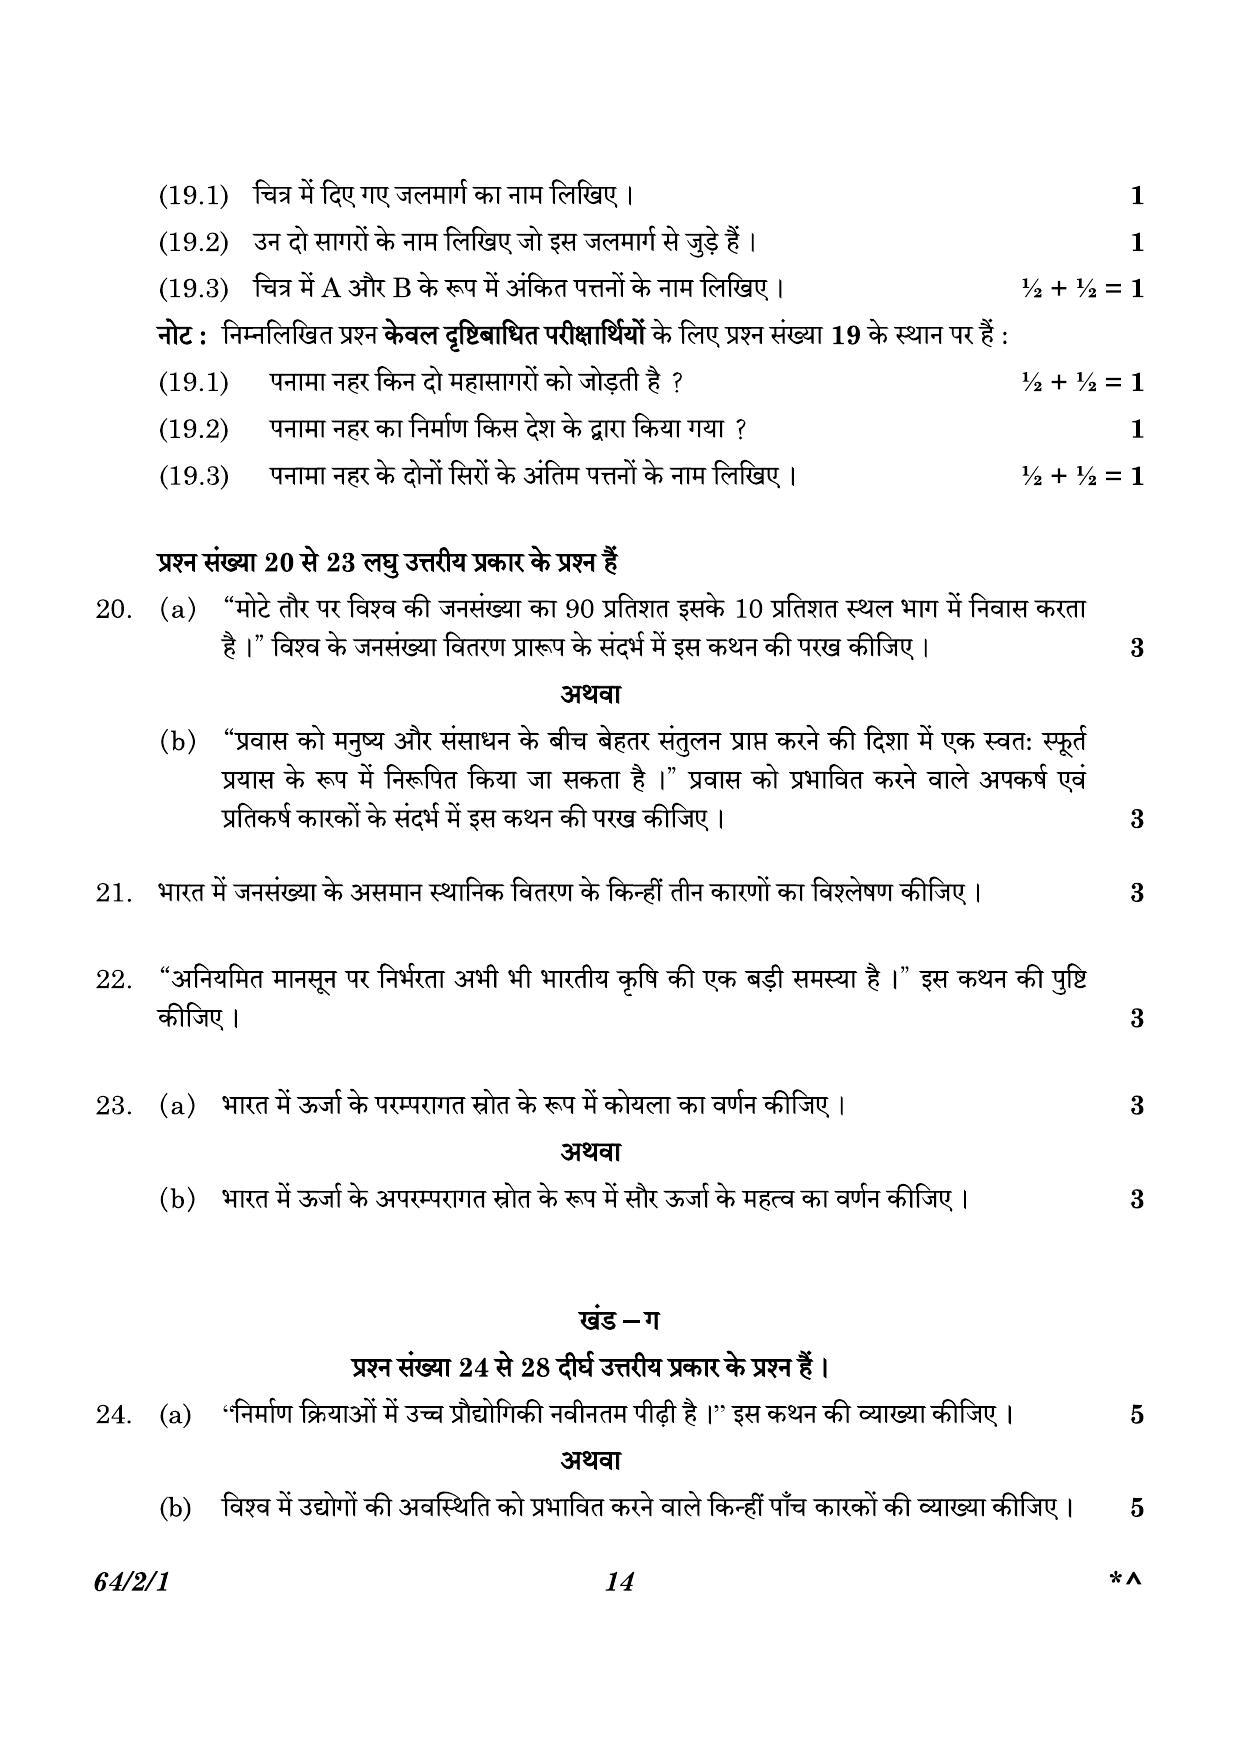 CBSE Class 12 64-2-1 Geography 2023 Question Paper - Page 14